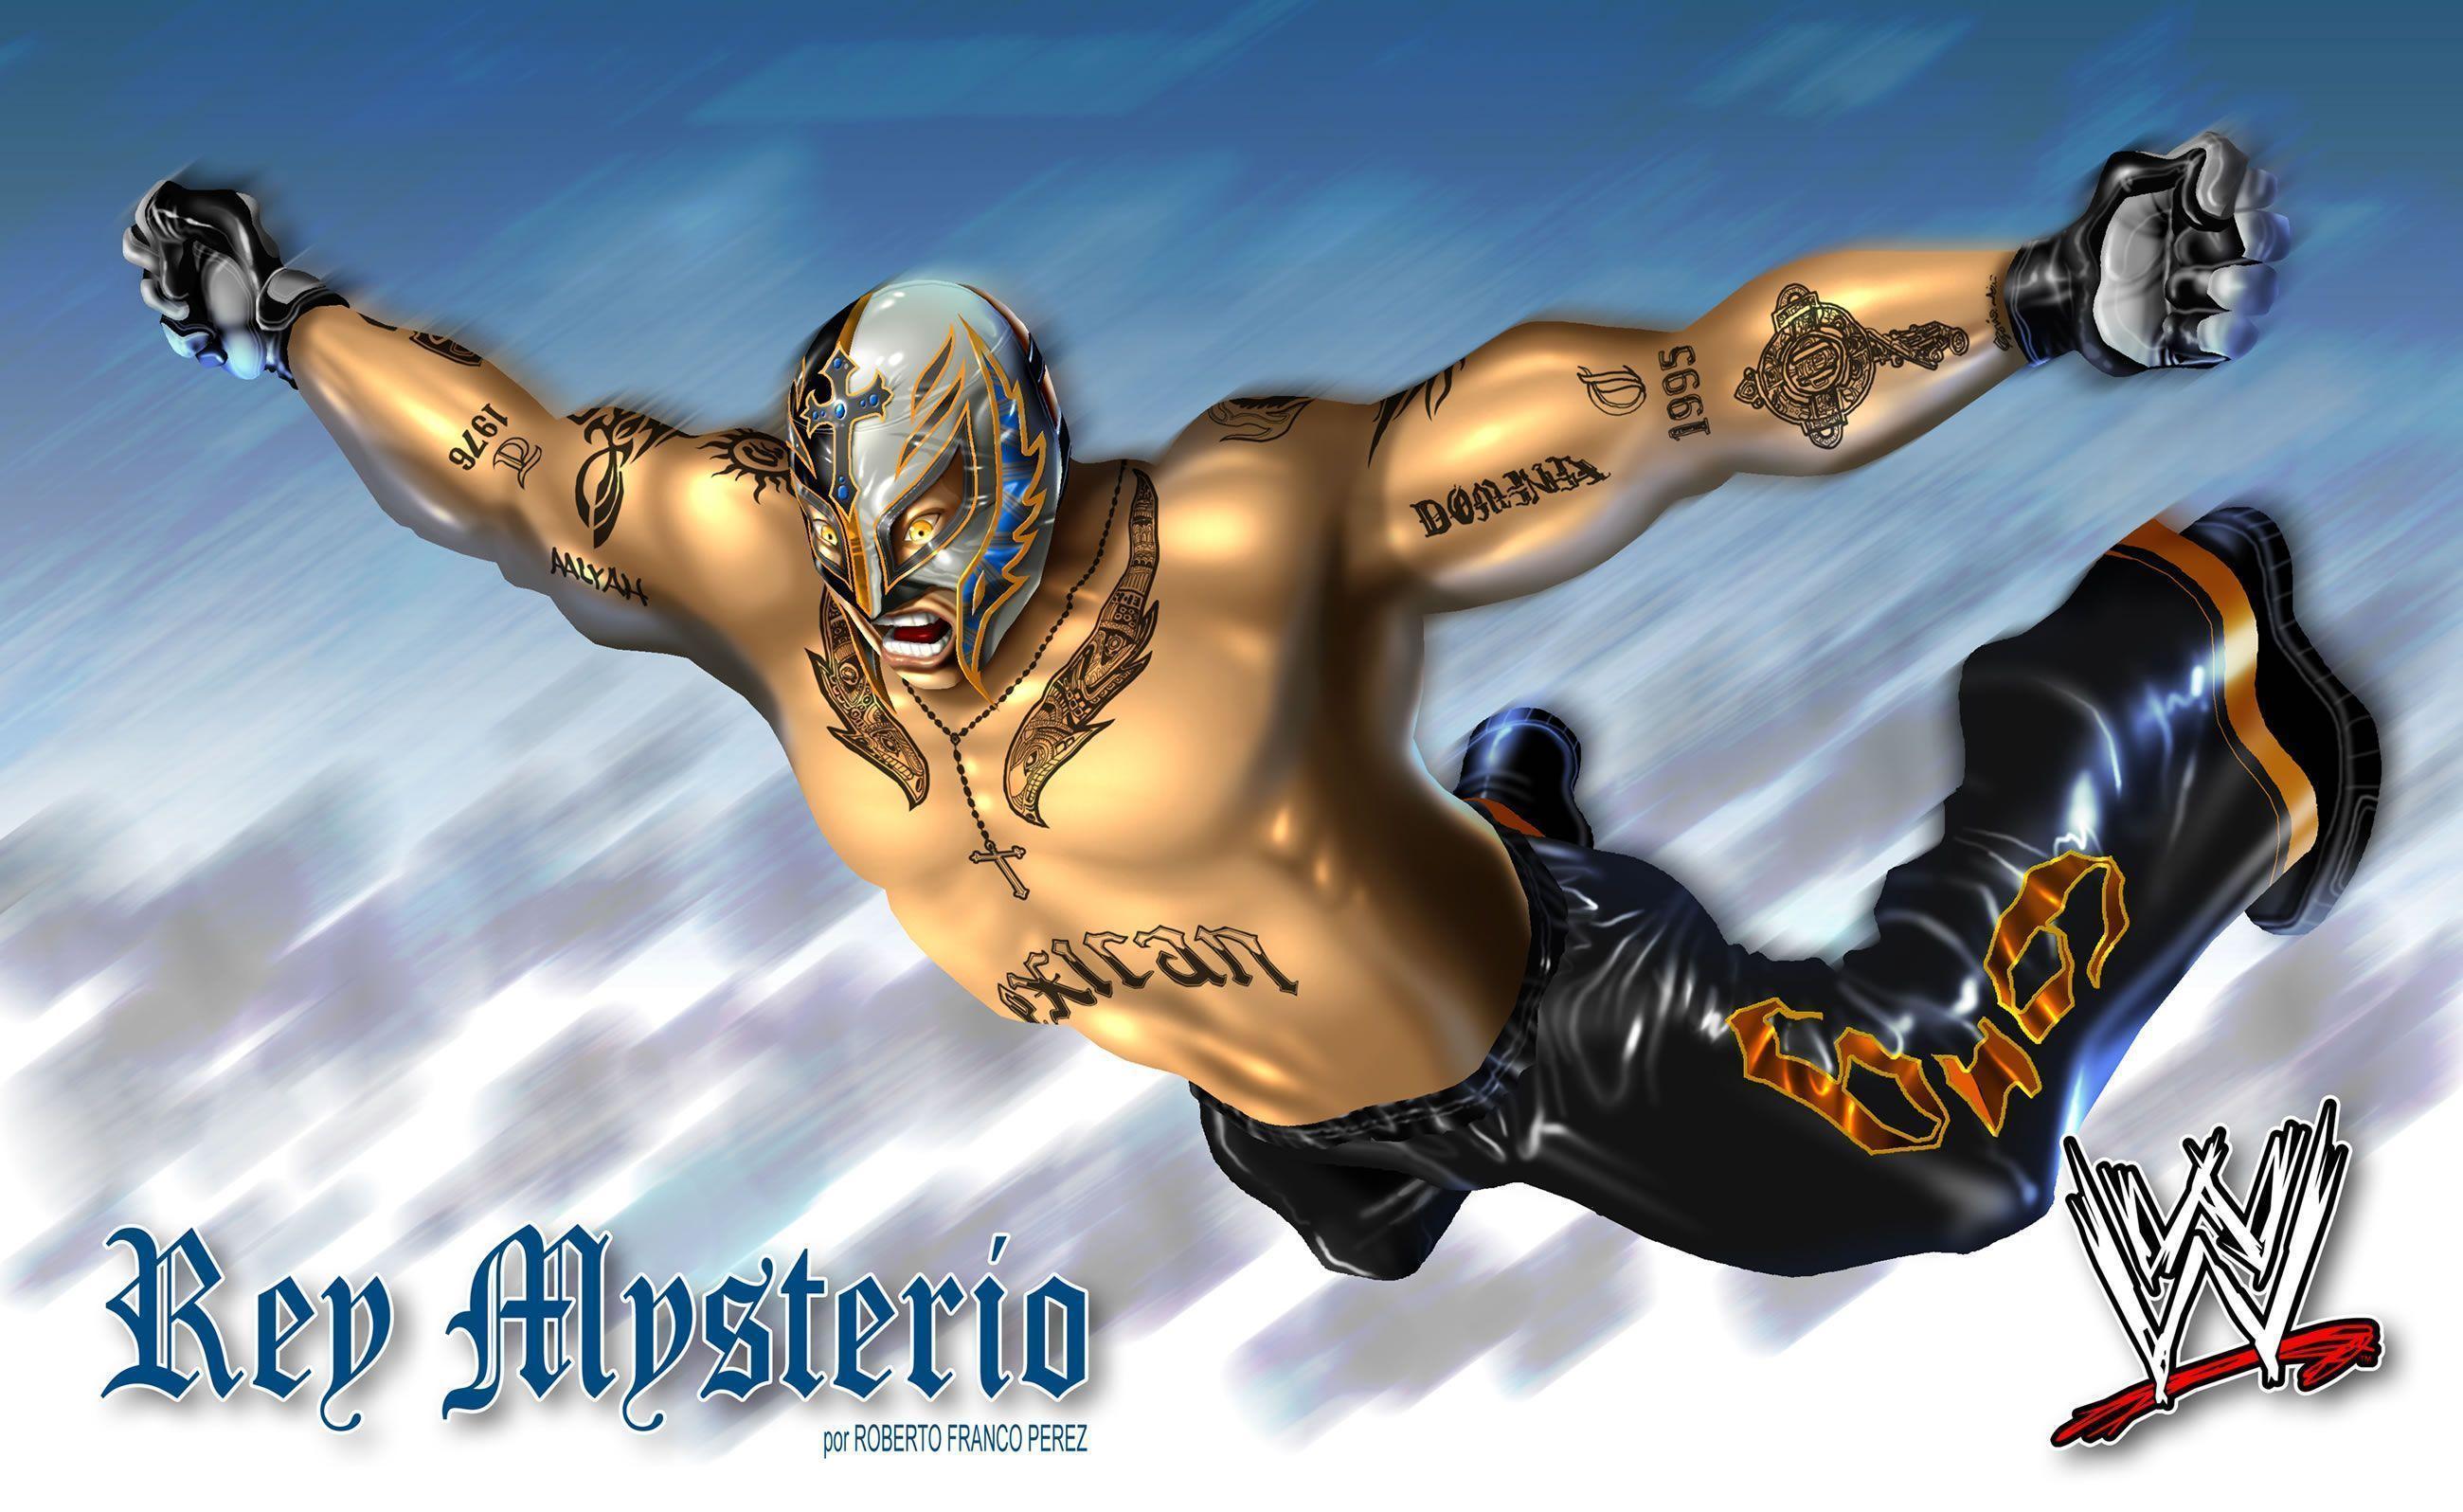 image For > Rey Misterio 2012